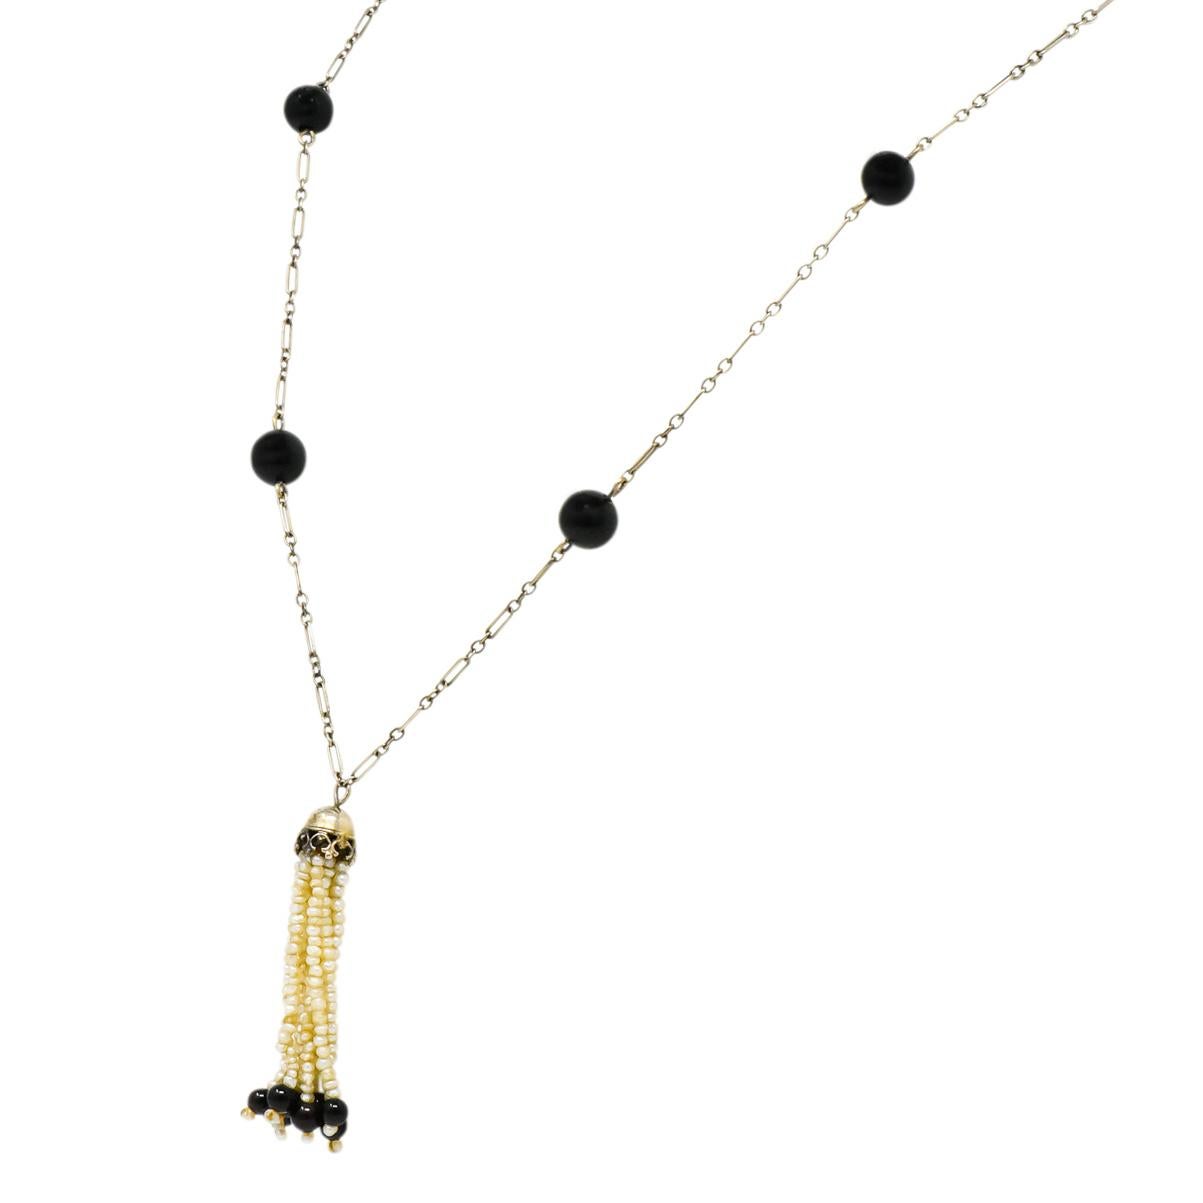 With ten seed pearl tassels, each terminating in a seed pearl and round onyx bead

With a polished millegrain and decorative cap

On a long and short cable style chain with graduated polished onyx bead stations

Twelve round onyx beads measure